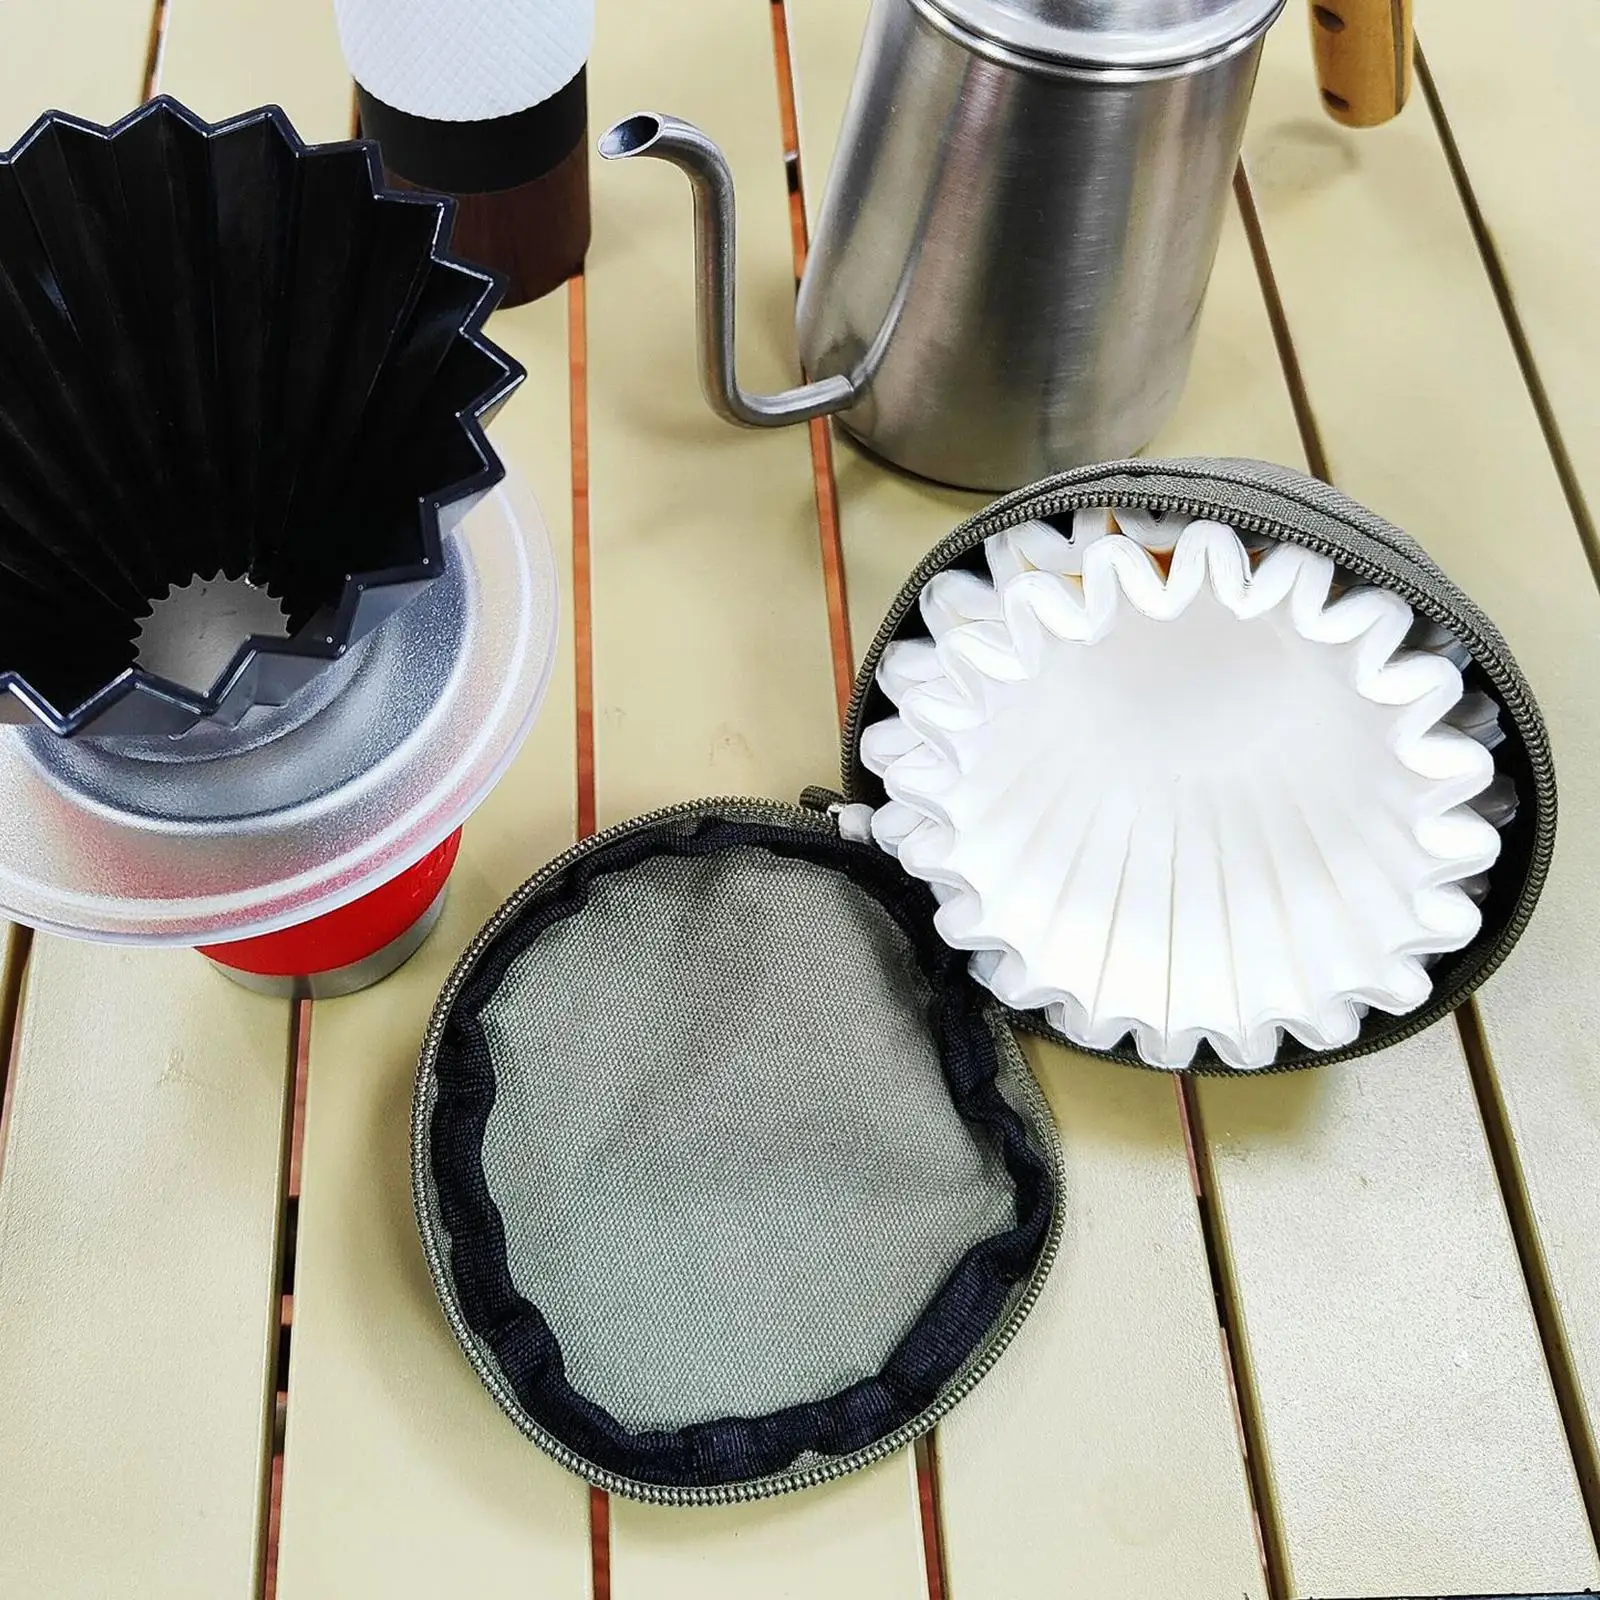 Coffee Filter Container Lightweight Basket Coffee Filter Holder for Hiking